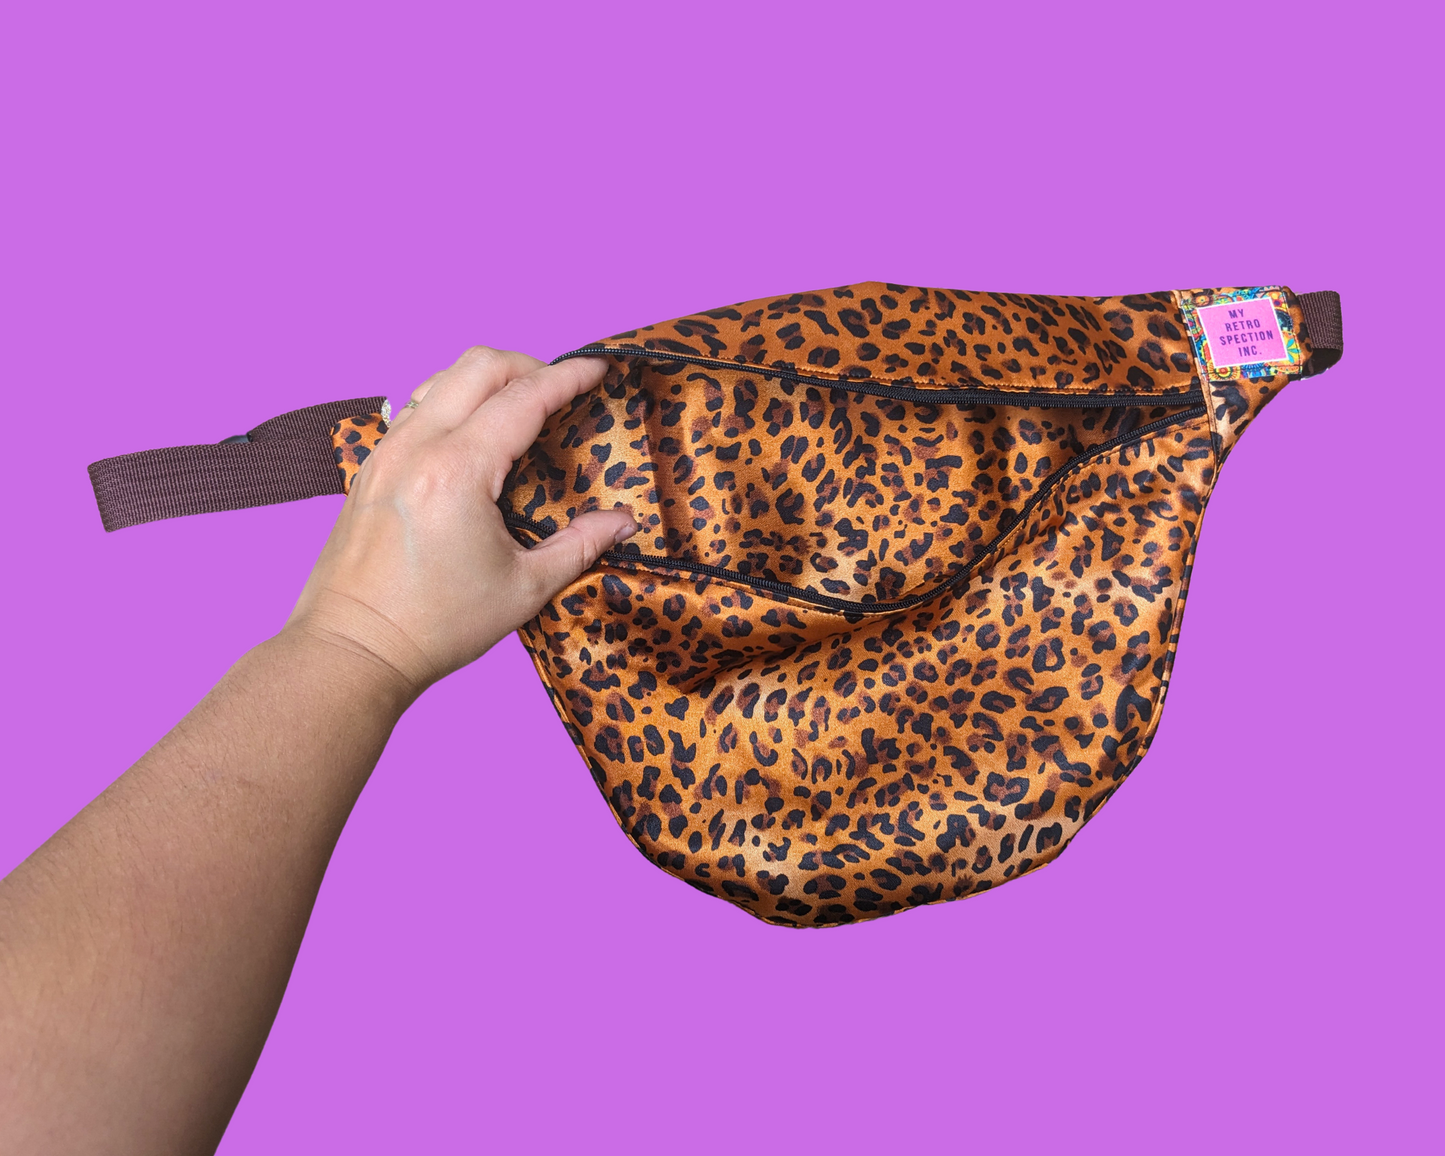 Handmade, Upcycled Silky Leopard Print Fanny Pack